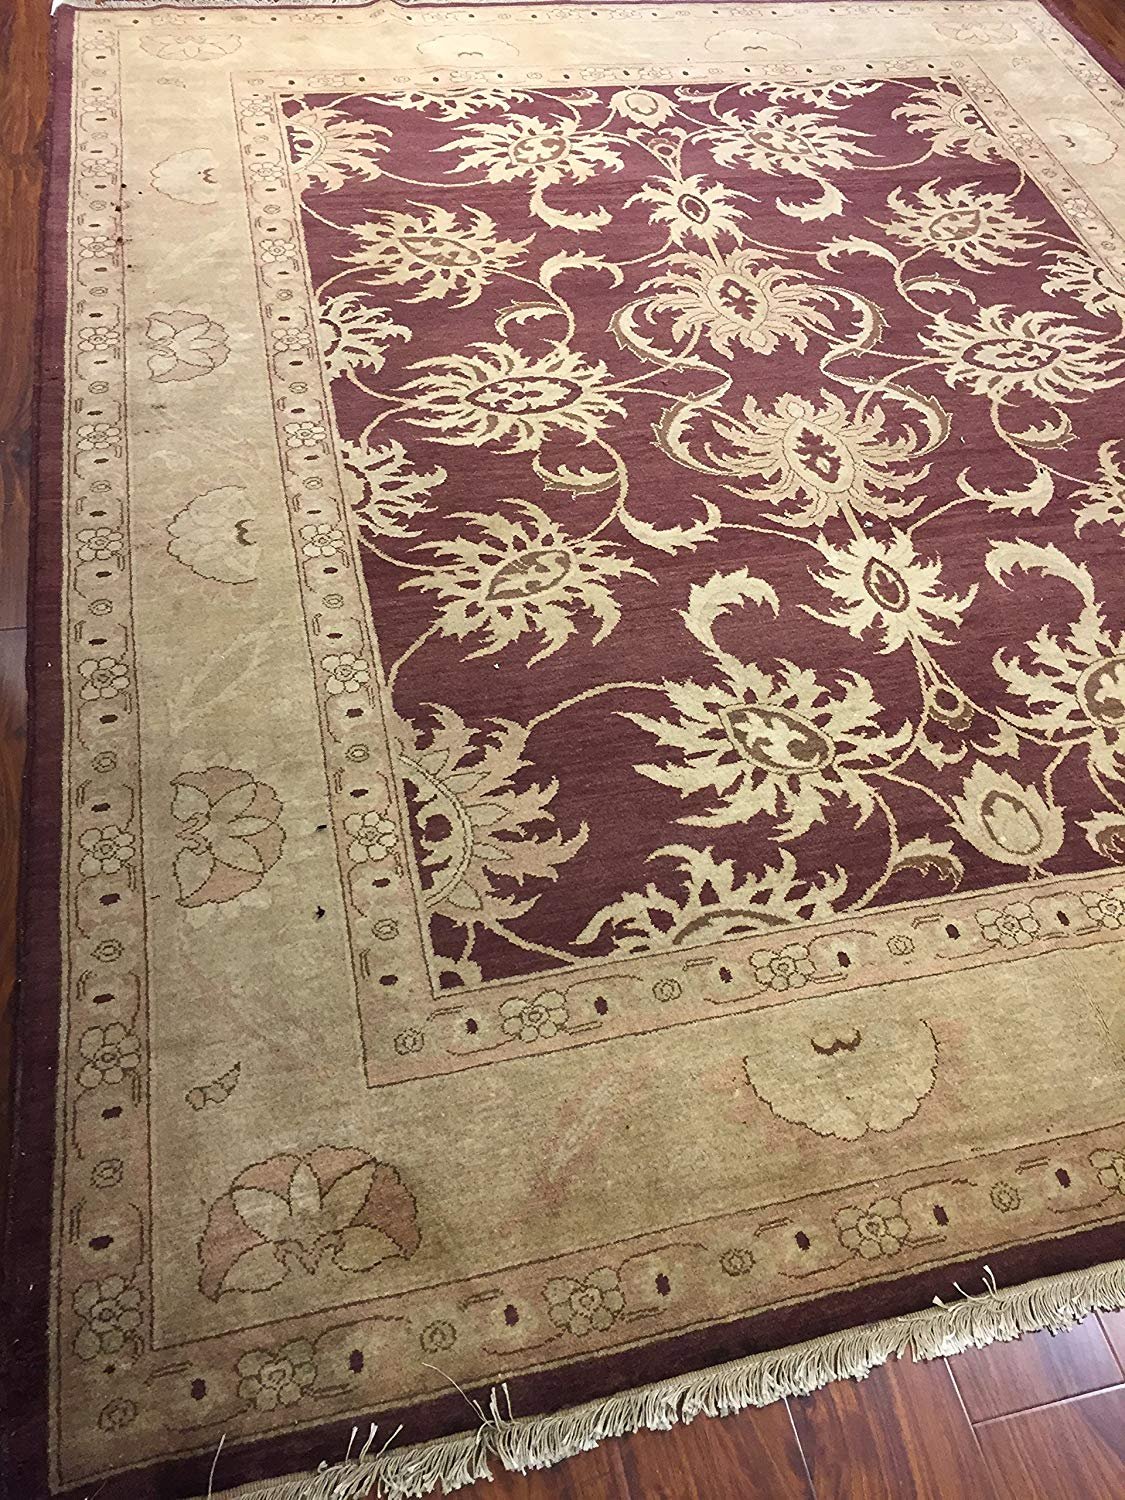 Authentic Handmade fine Pakistan Rug-Real Wool Allover Floral Pattern Faded/Vintage-Chocolate/Beige-(7.11 by 9.8 Feet)